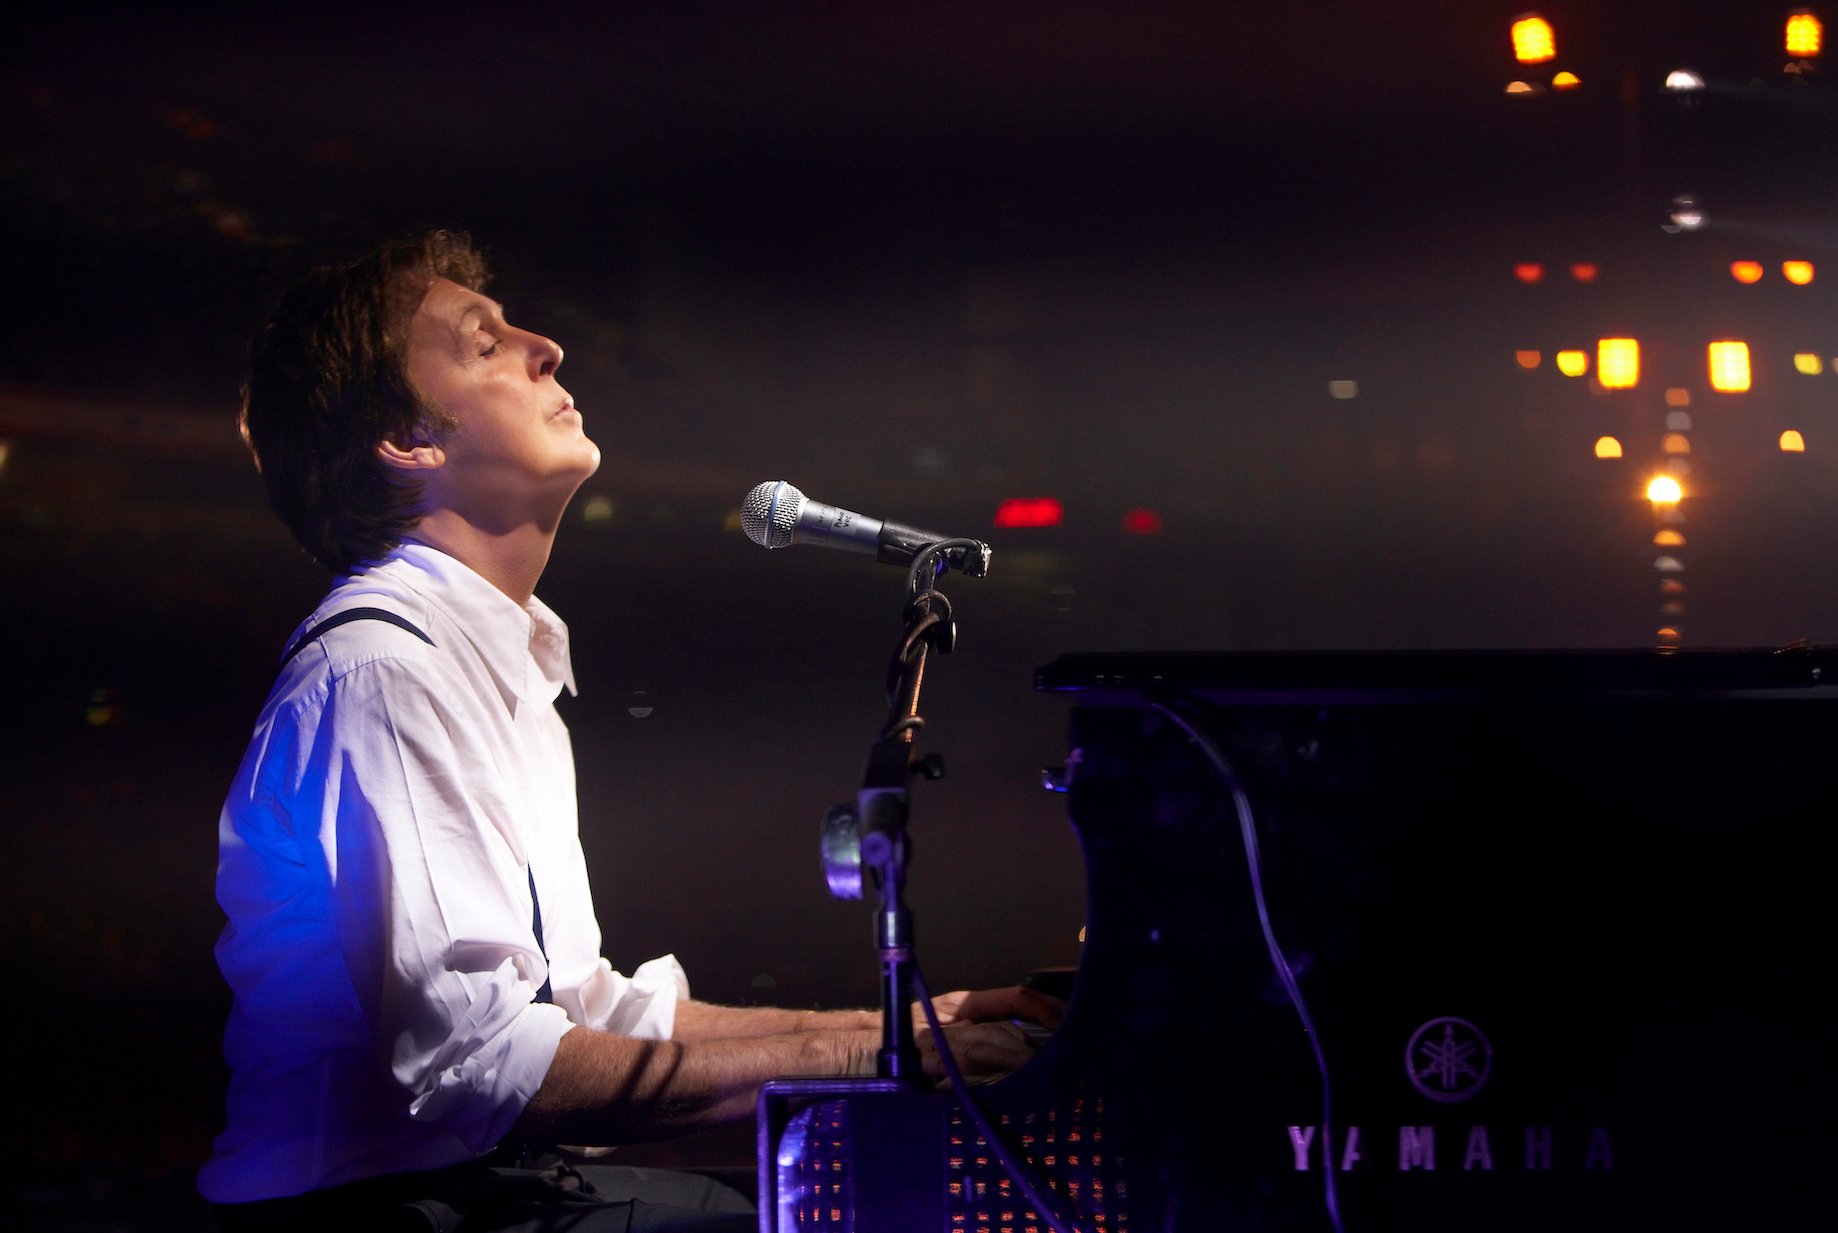 Paul McCartney performs during the Liverpool Sound concert at Anfield Stadium in Liverpool, England